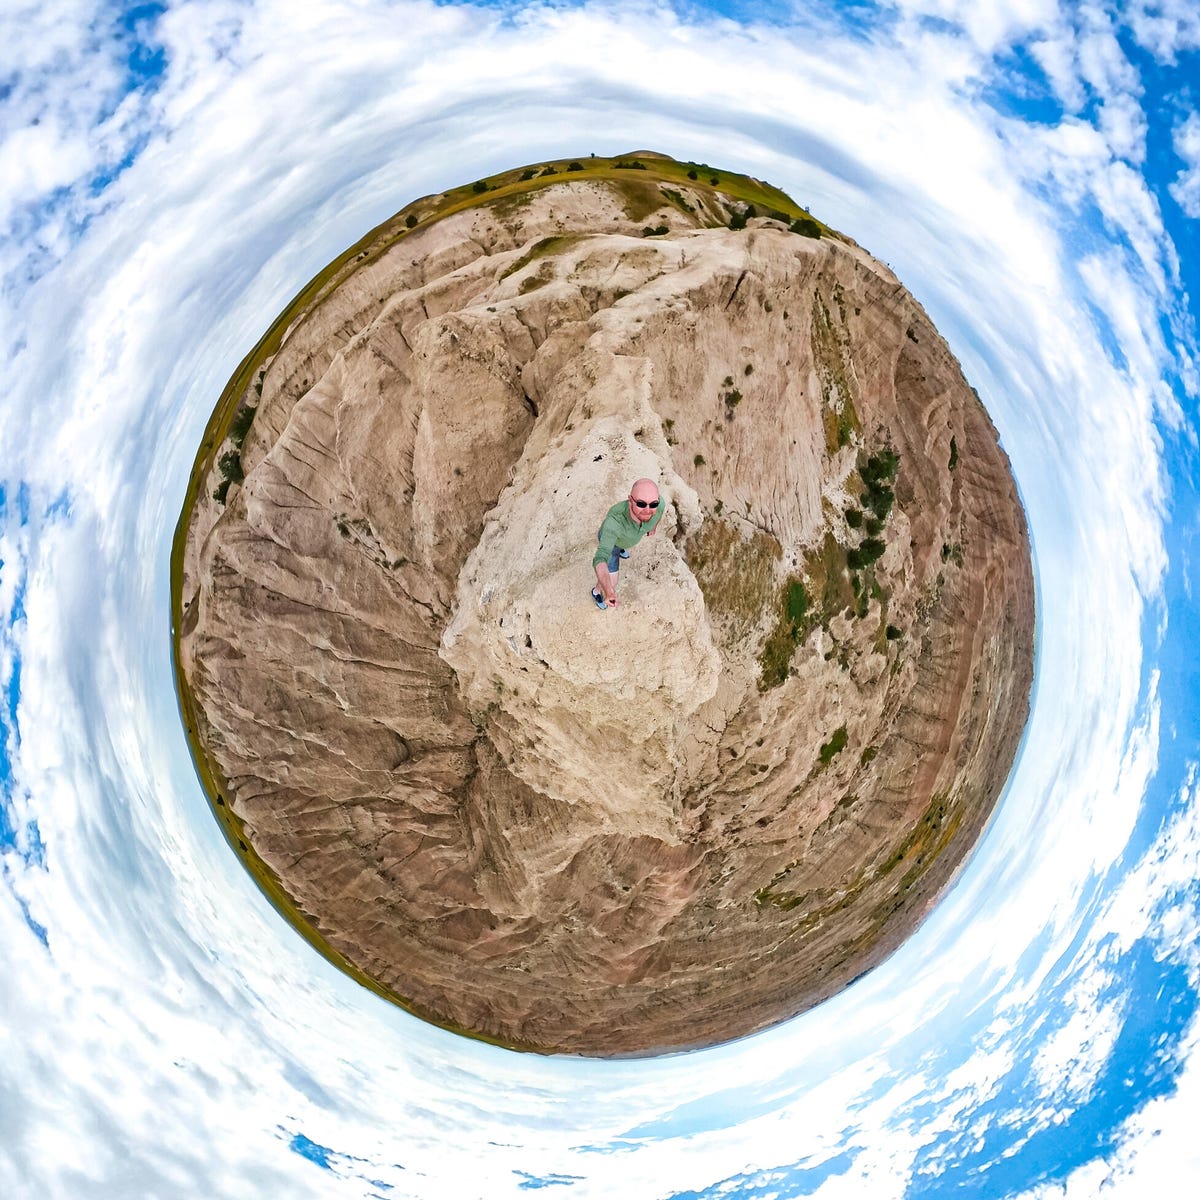 Precariously perched over the Badlands, thanks to a 360 camera and a selfie stick.